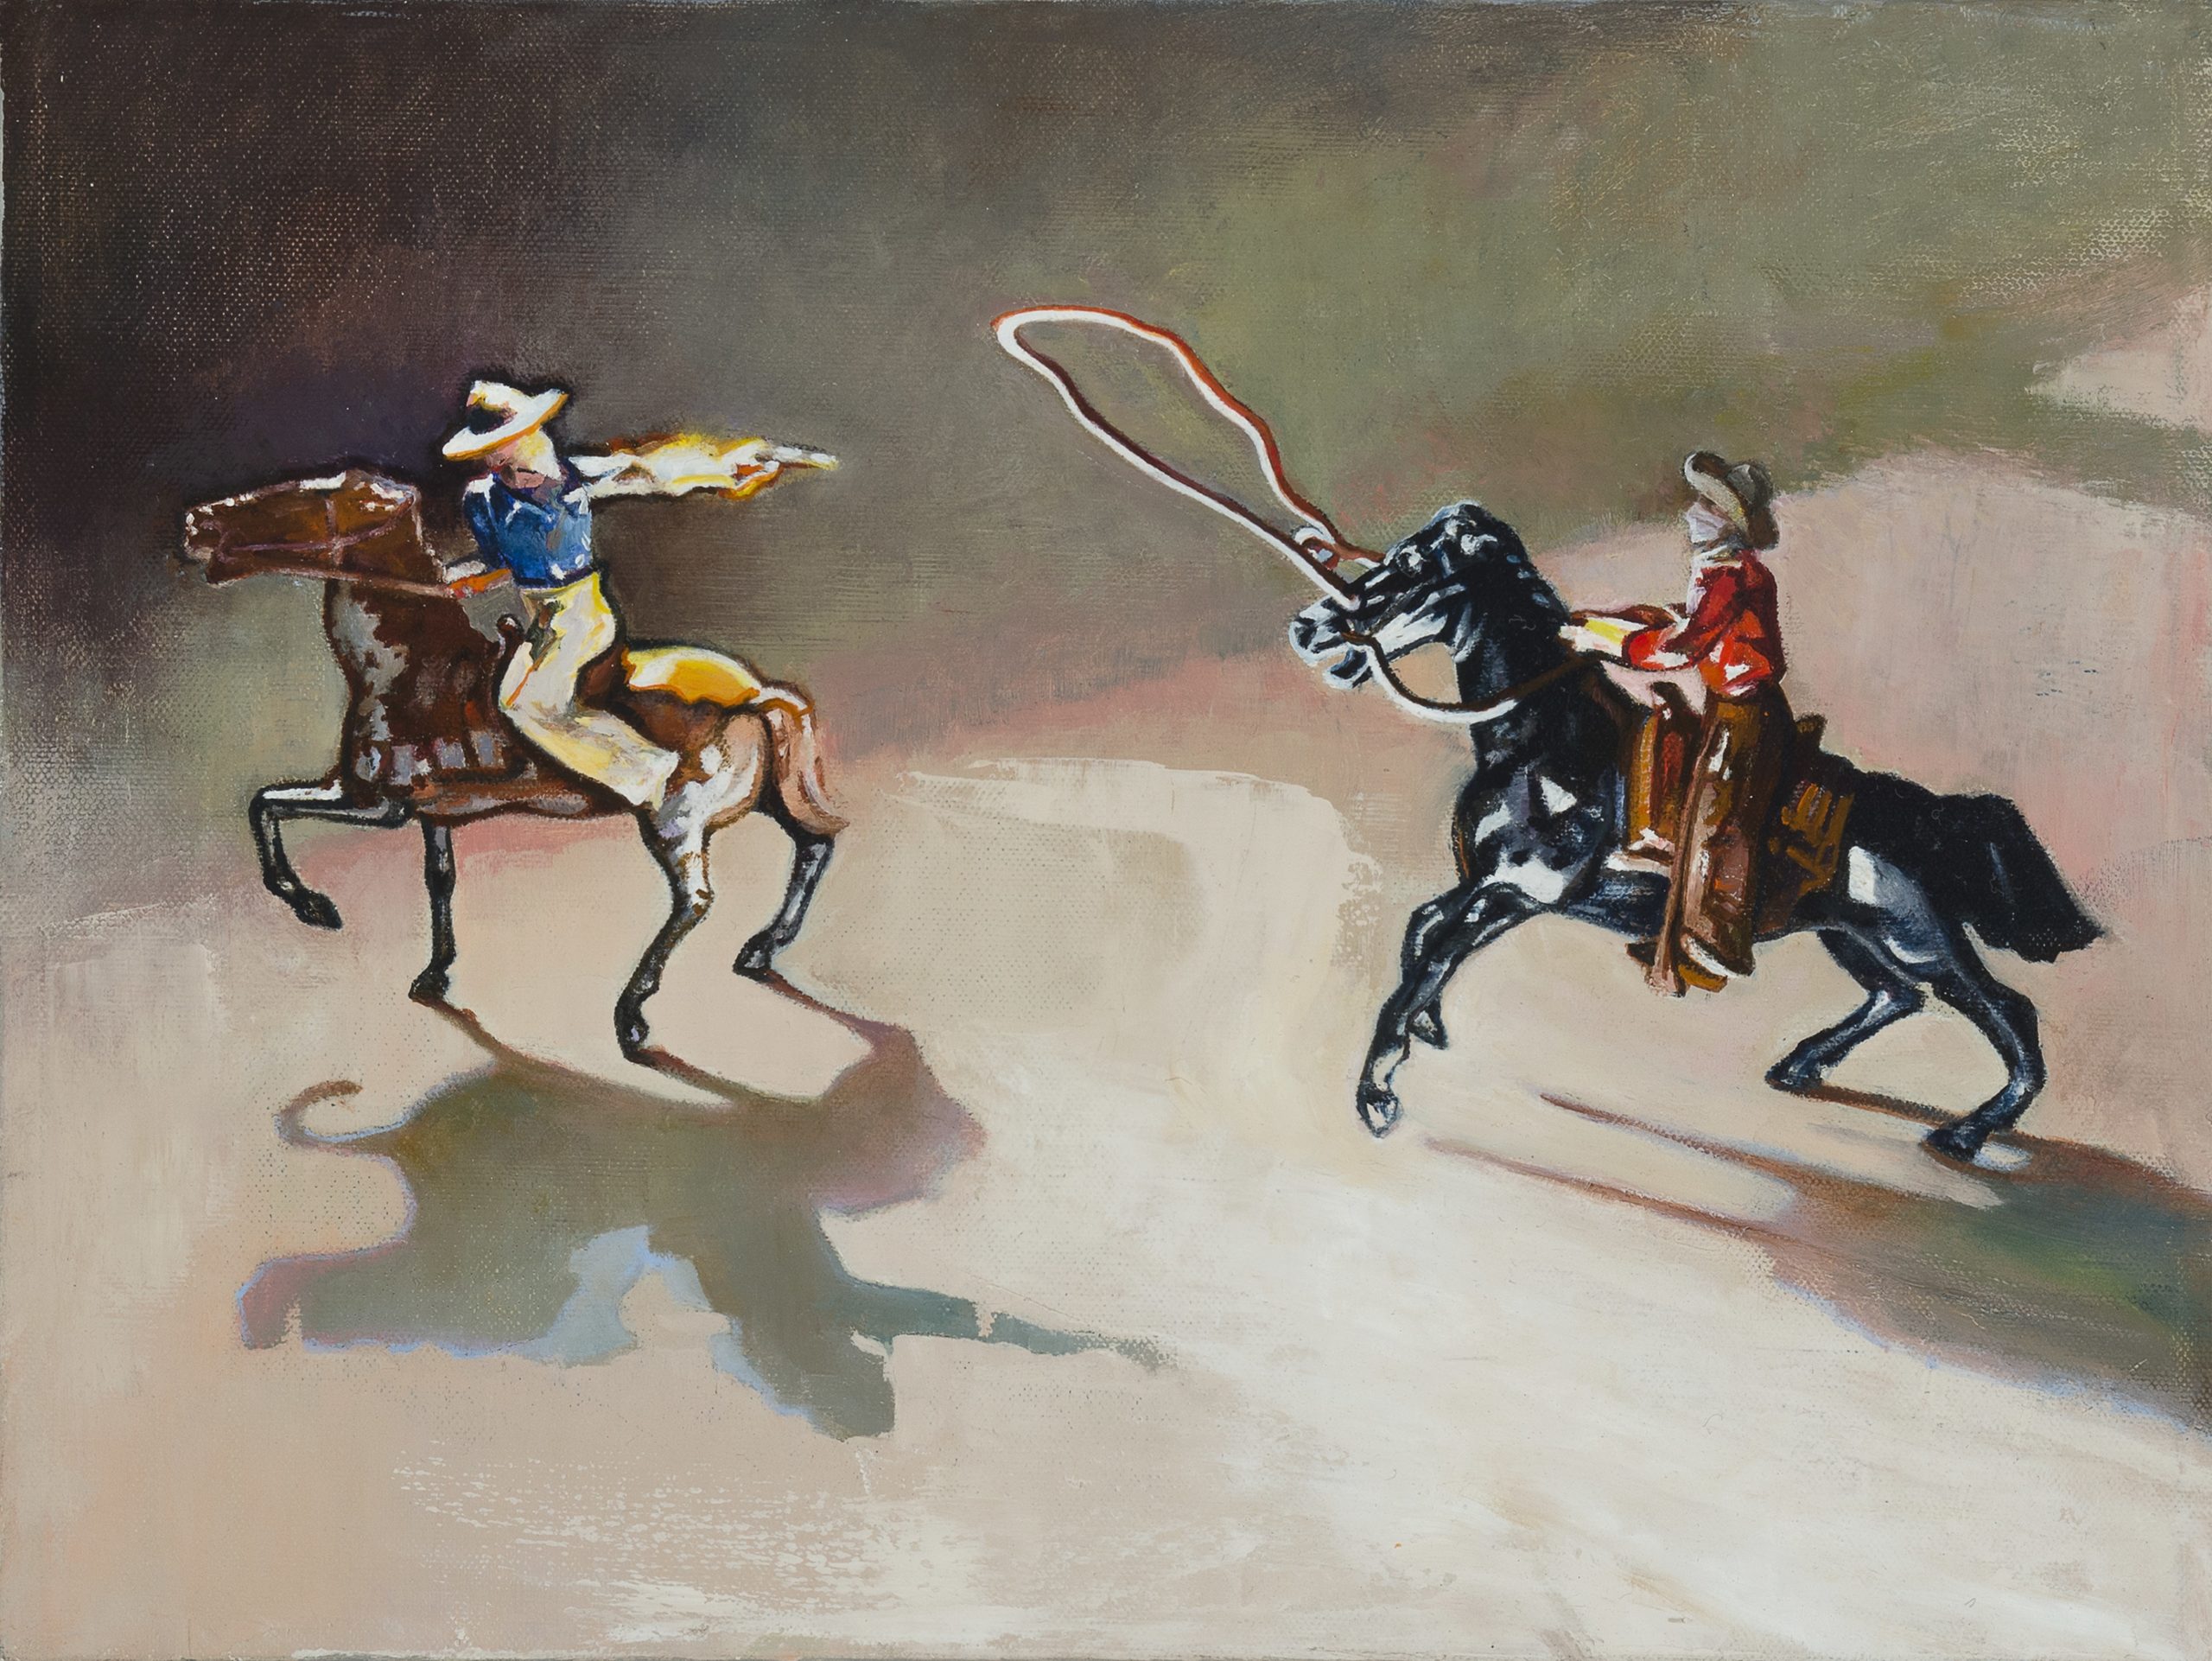 
		                					Patricia Beggins Magers		                																	
																											<i>The Constituents: The Shootout,</i>  
																																																					oil on canvax, 
																																								12 x 16 inches 
																								
		                				